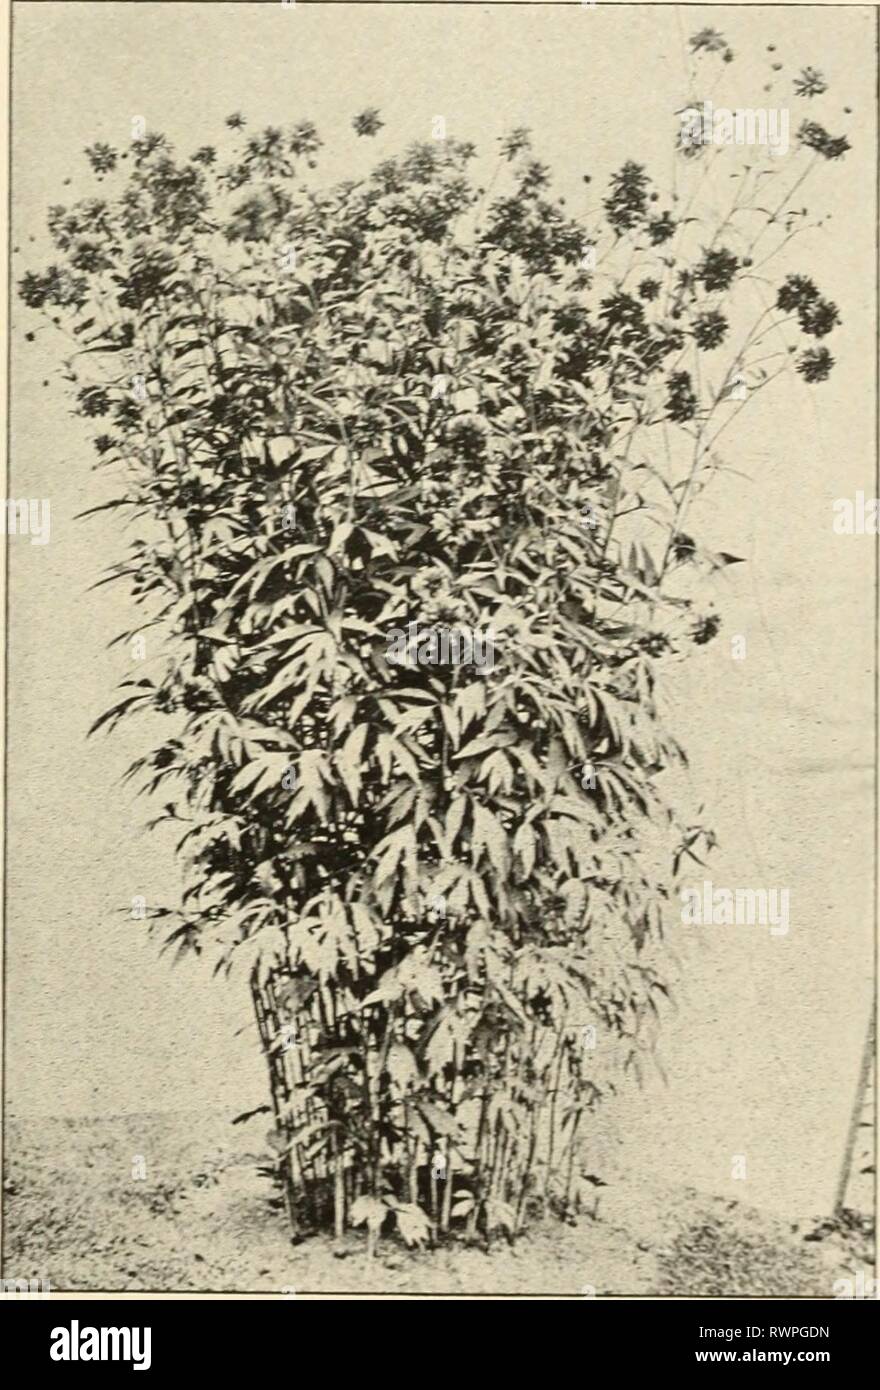 Ellwanger & Barry  Mount Ellwanger & Barry : Mount Hope nurseries ellwangerbarrymo1899moun Year: 1899  GEXERAL CATALOGUE. 115 PYRETHRUM. A most valuable class of hardy plants. Flowers of good size and form, double like an aster: for bouquets or cut flowers. The plants make showy specimens in the garden. May or June. FIXE NAMED VARIETIES. ;o Cents Each. ery useful RANUNCULUS. Buttercup. These are among the best of early spring flowers, being very effective. R. amplexicaulis. Flowers snowy white; 6 to 9 inches. April and May. 25c. R. aconitifolius luteo pleno. Double orange yellow Crowfoot; 2 fe Stock Photo